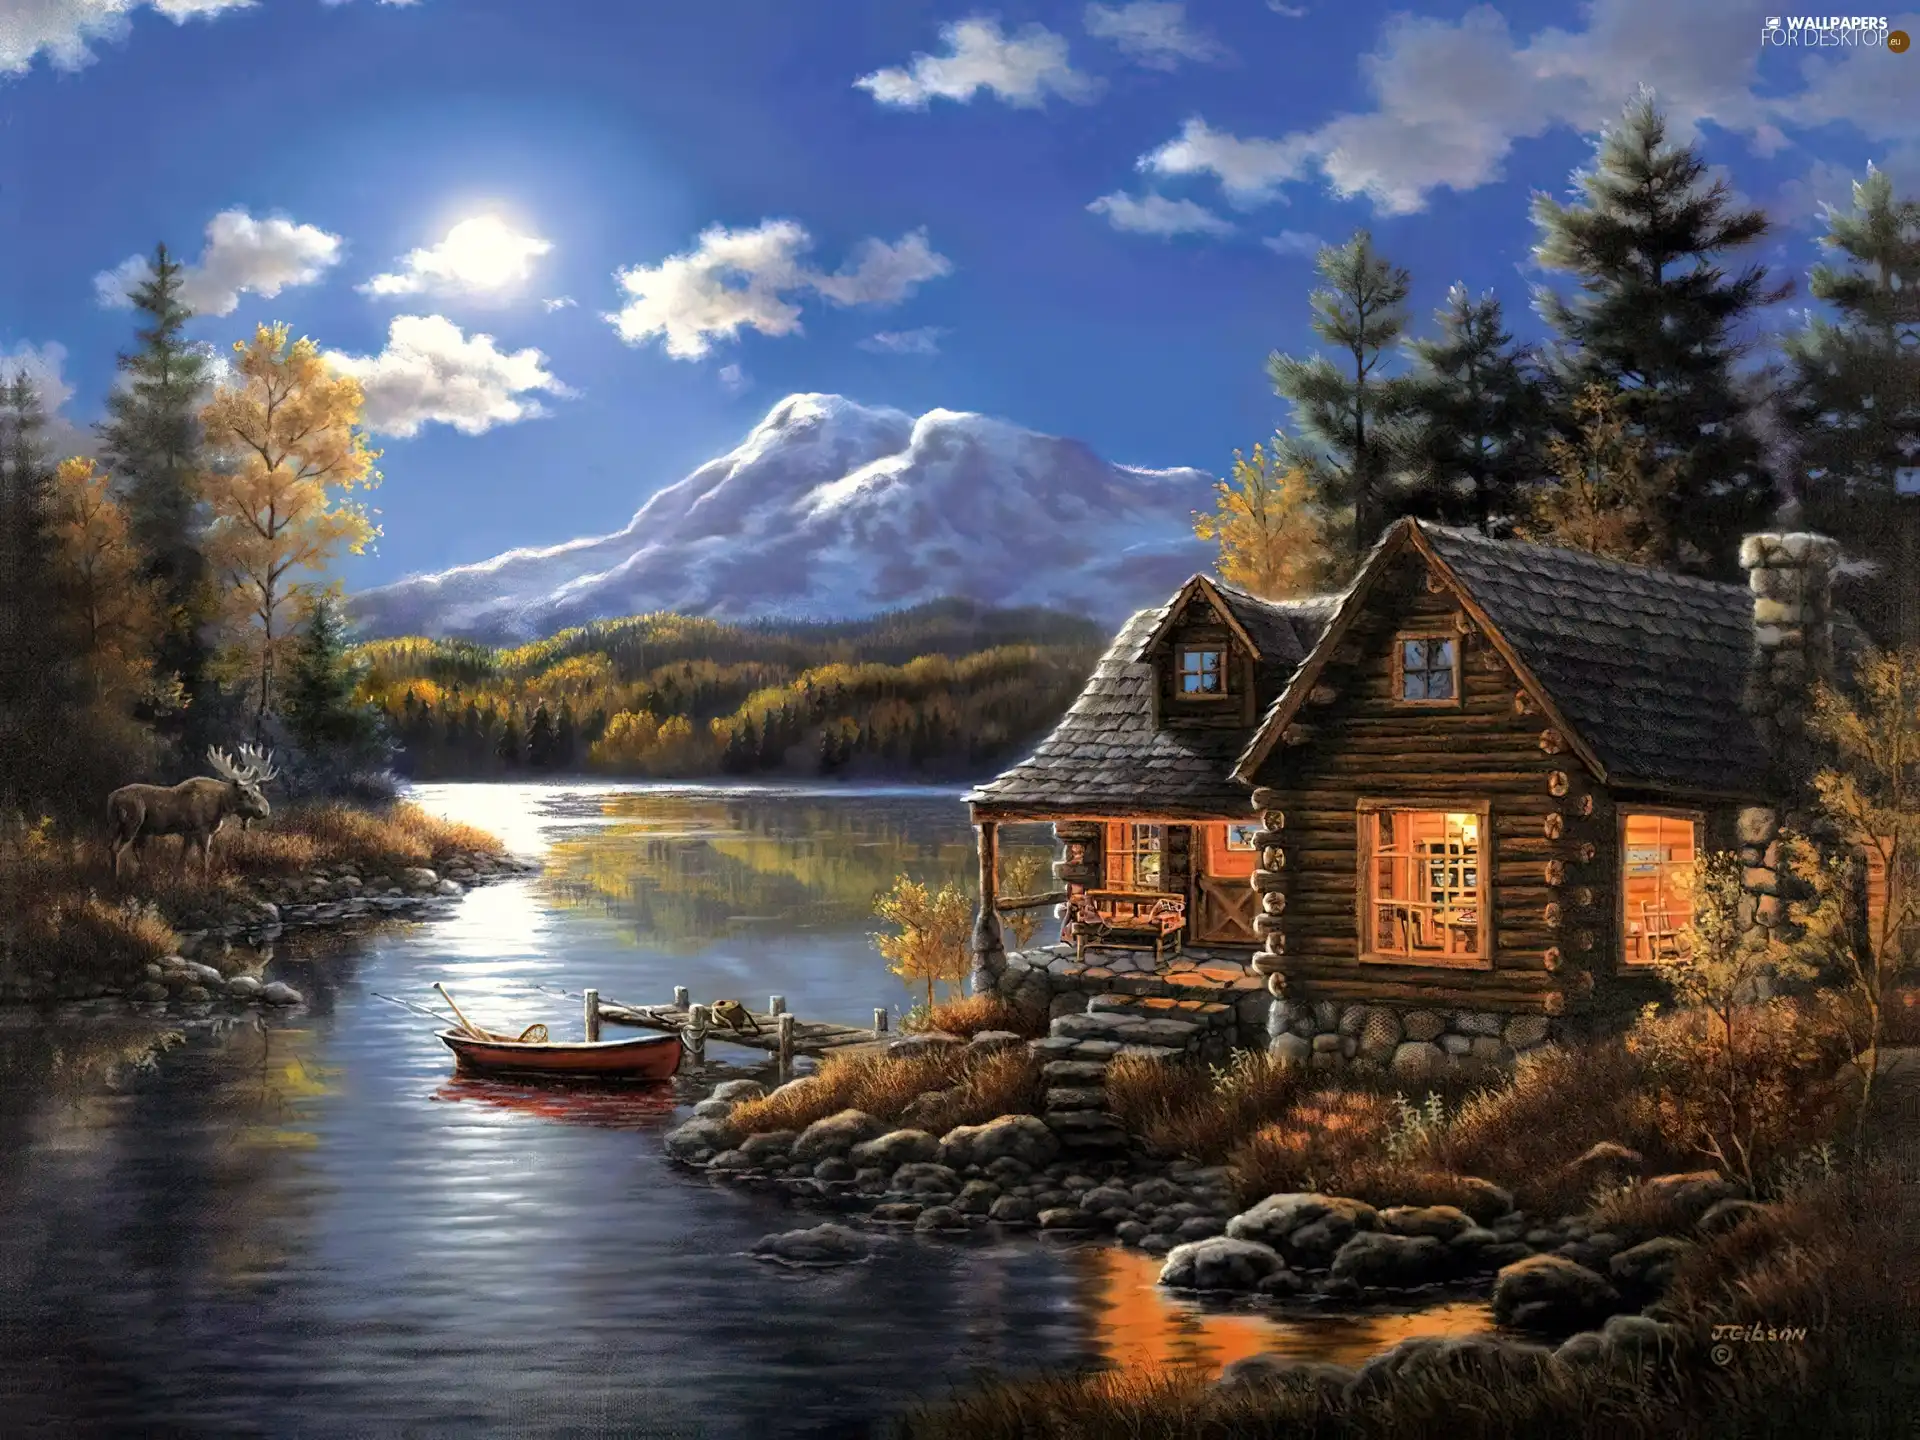 Boat Sun Mountains Lake Houses For Desktop Wallpapers 1920x1440